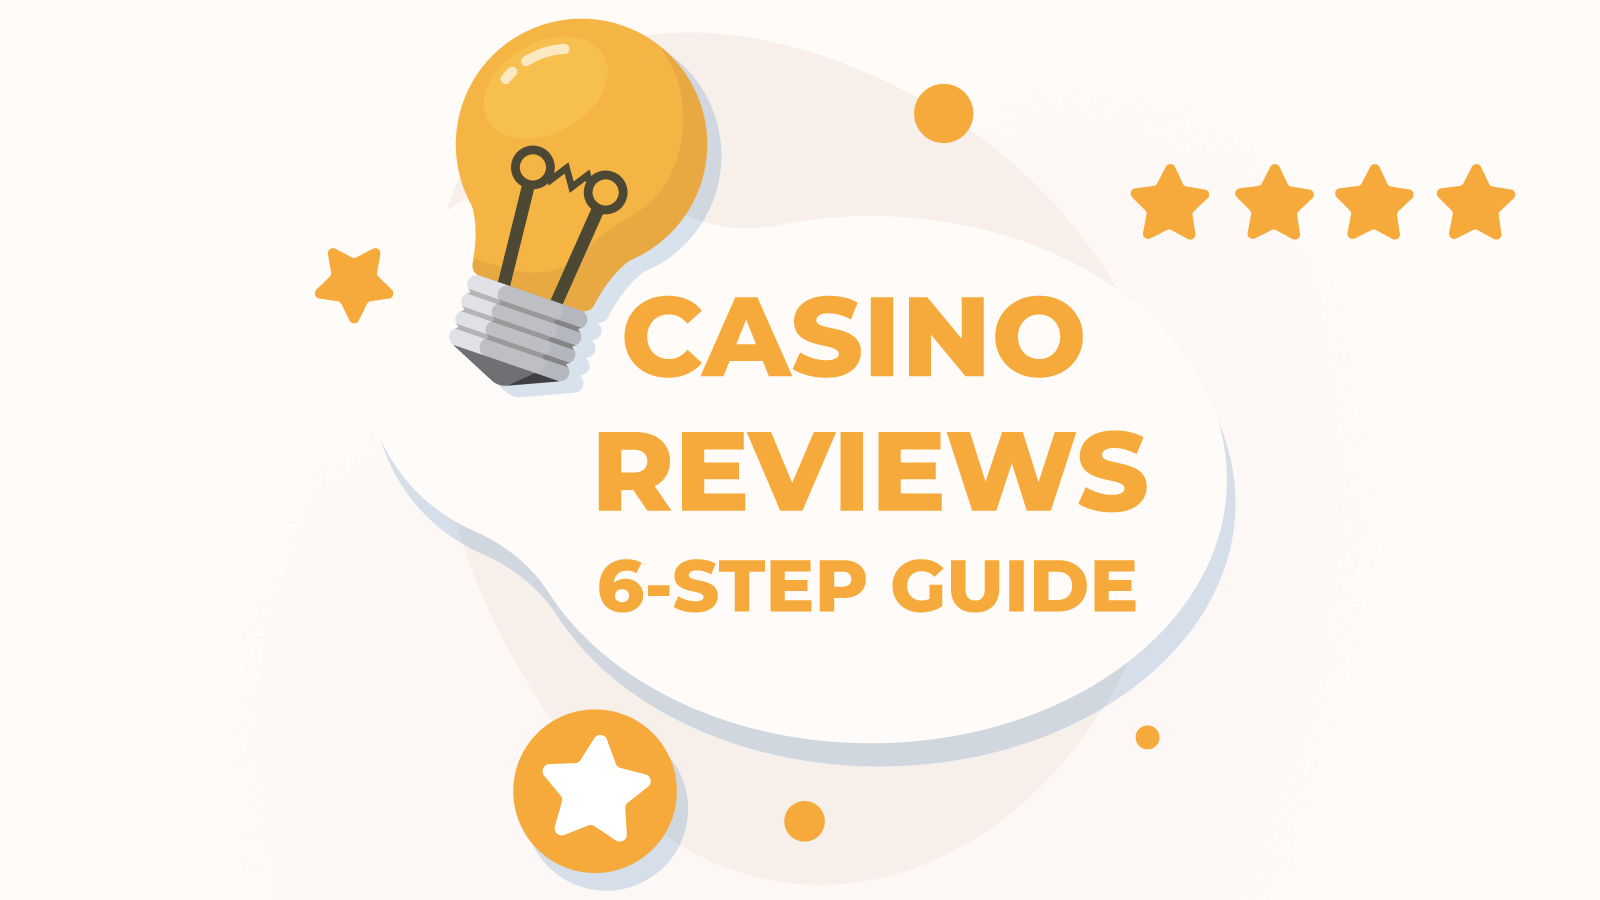 How to use our 2022 Ireland casino reviews 6-step guide